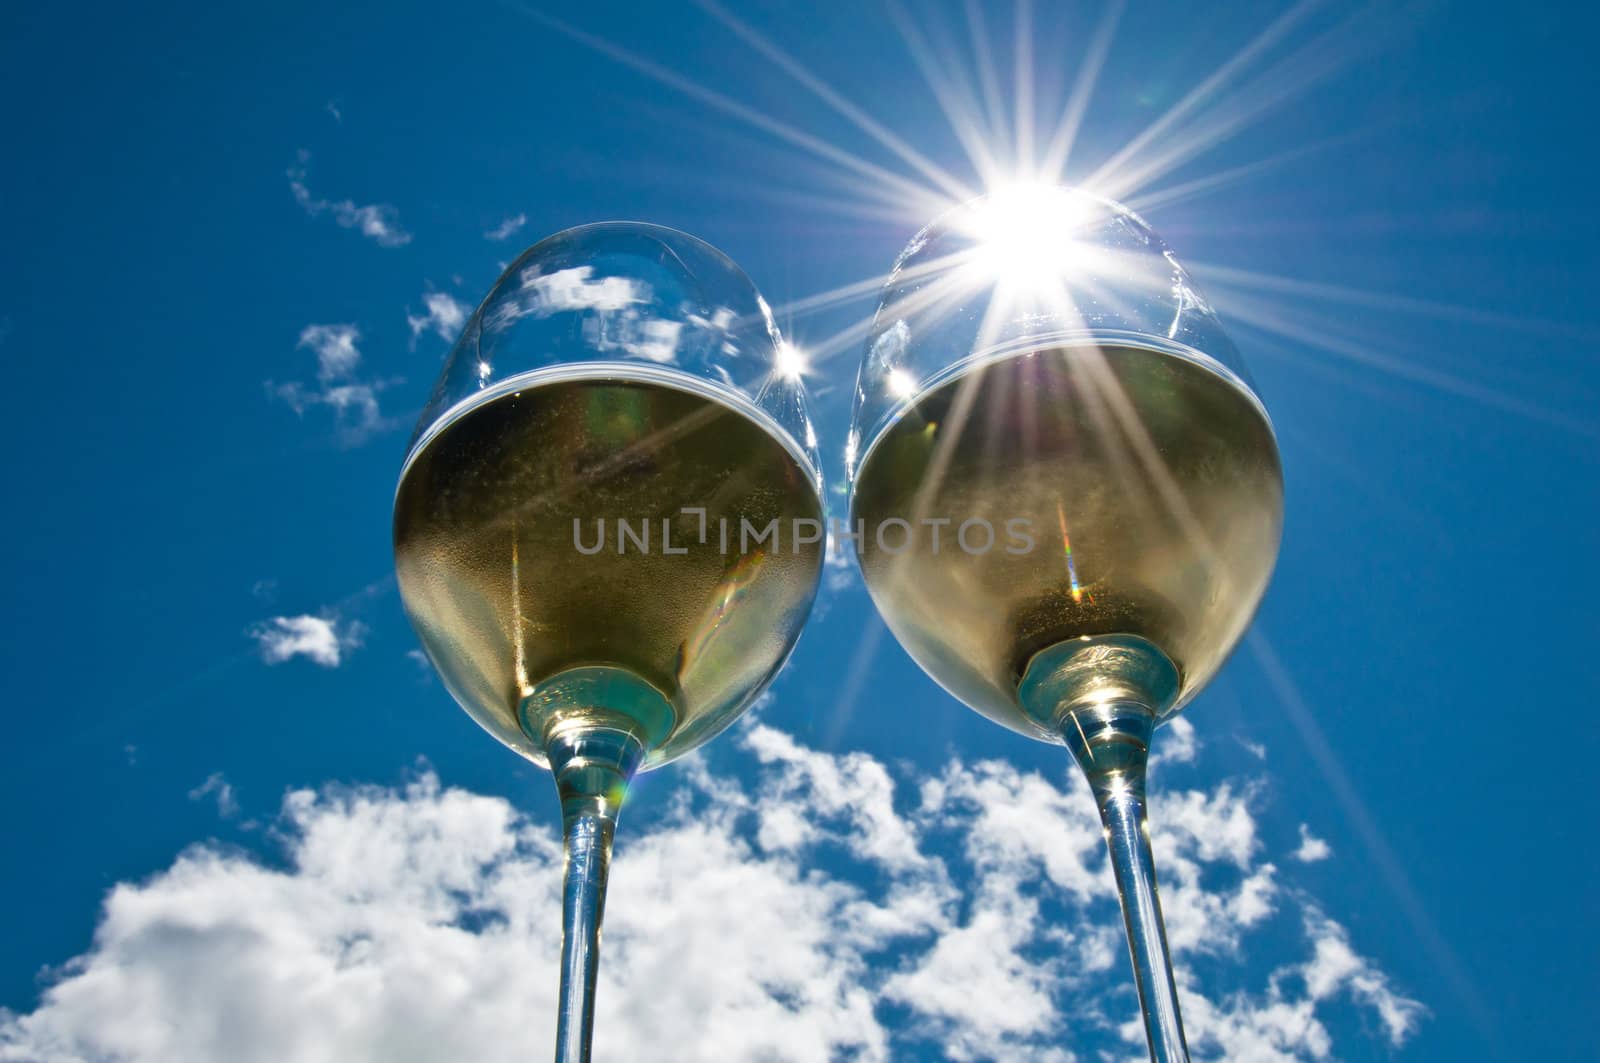 looking up at a closeup of two glasses of white wine & a sunburst through one of them & bright blue sky & clouds in the background.